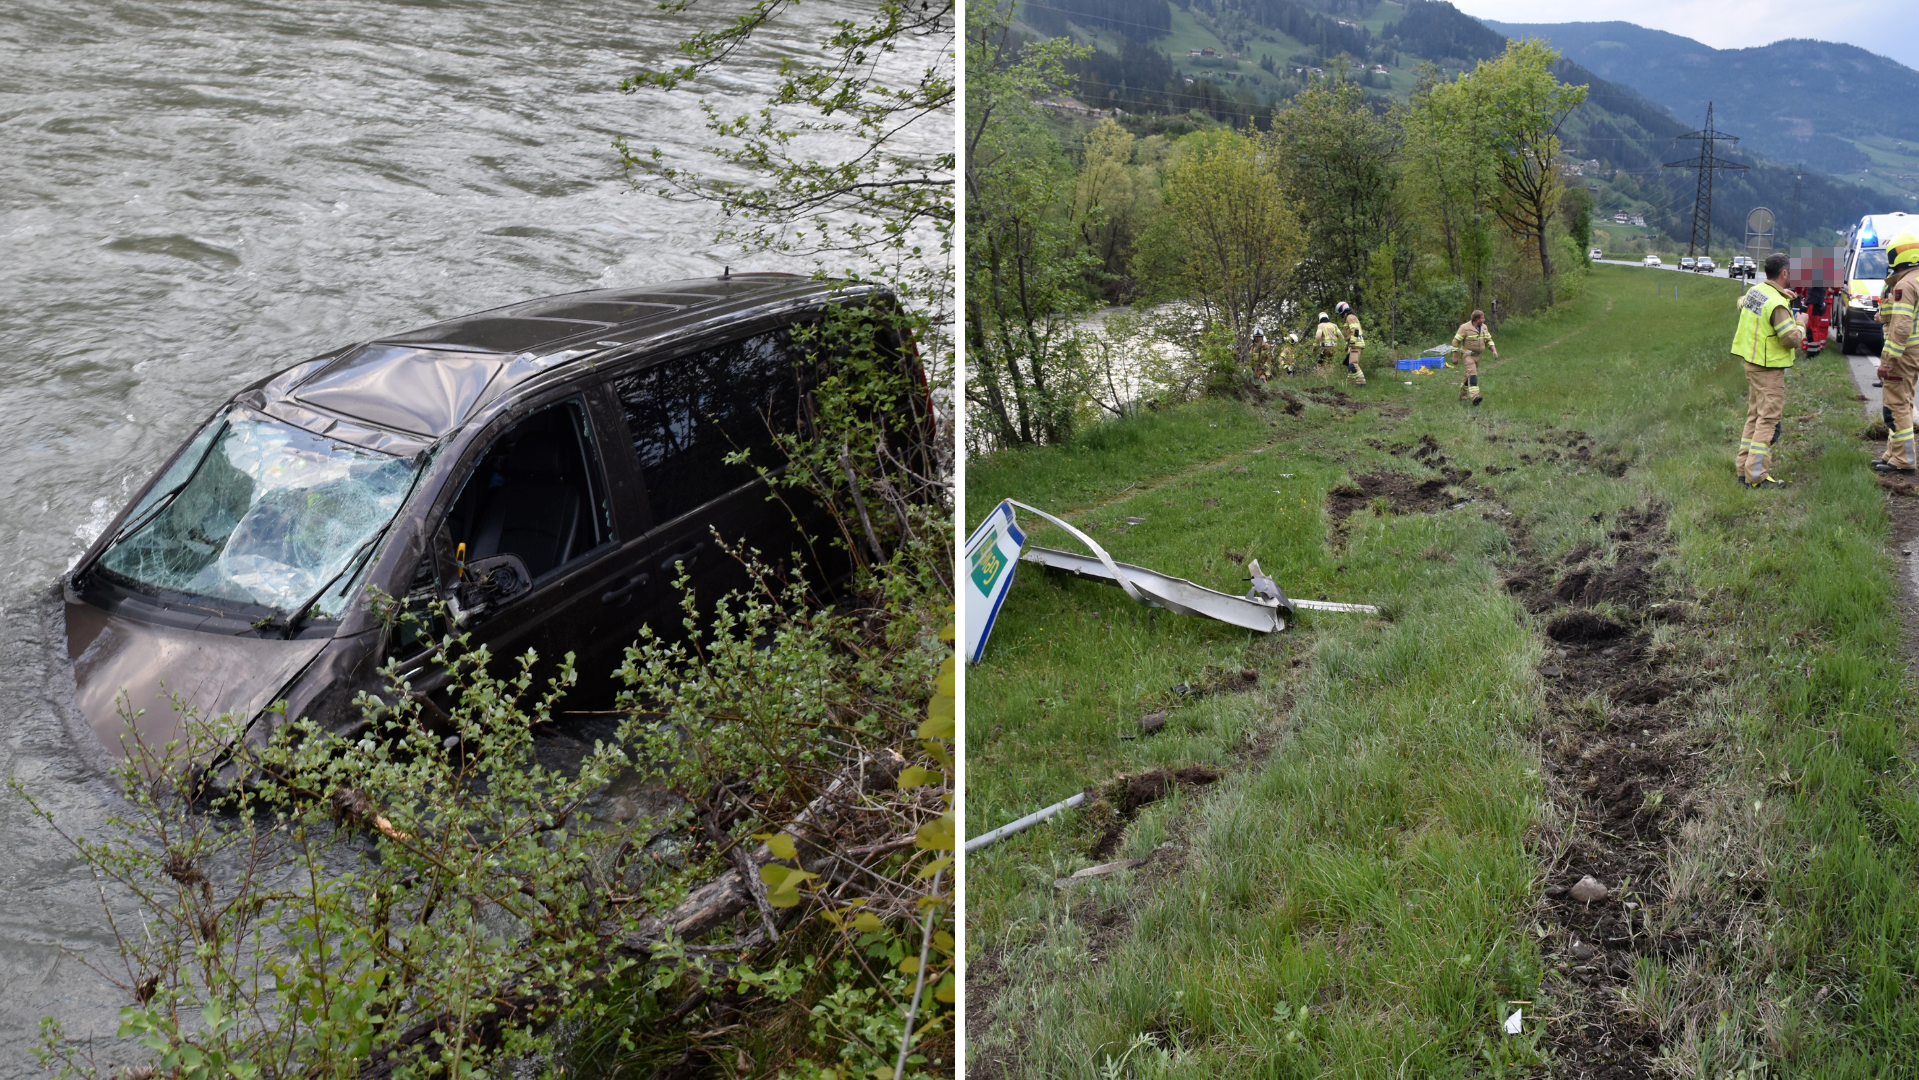 The accident triggered a major operation. (Bild: zoom.tirol)